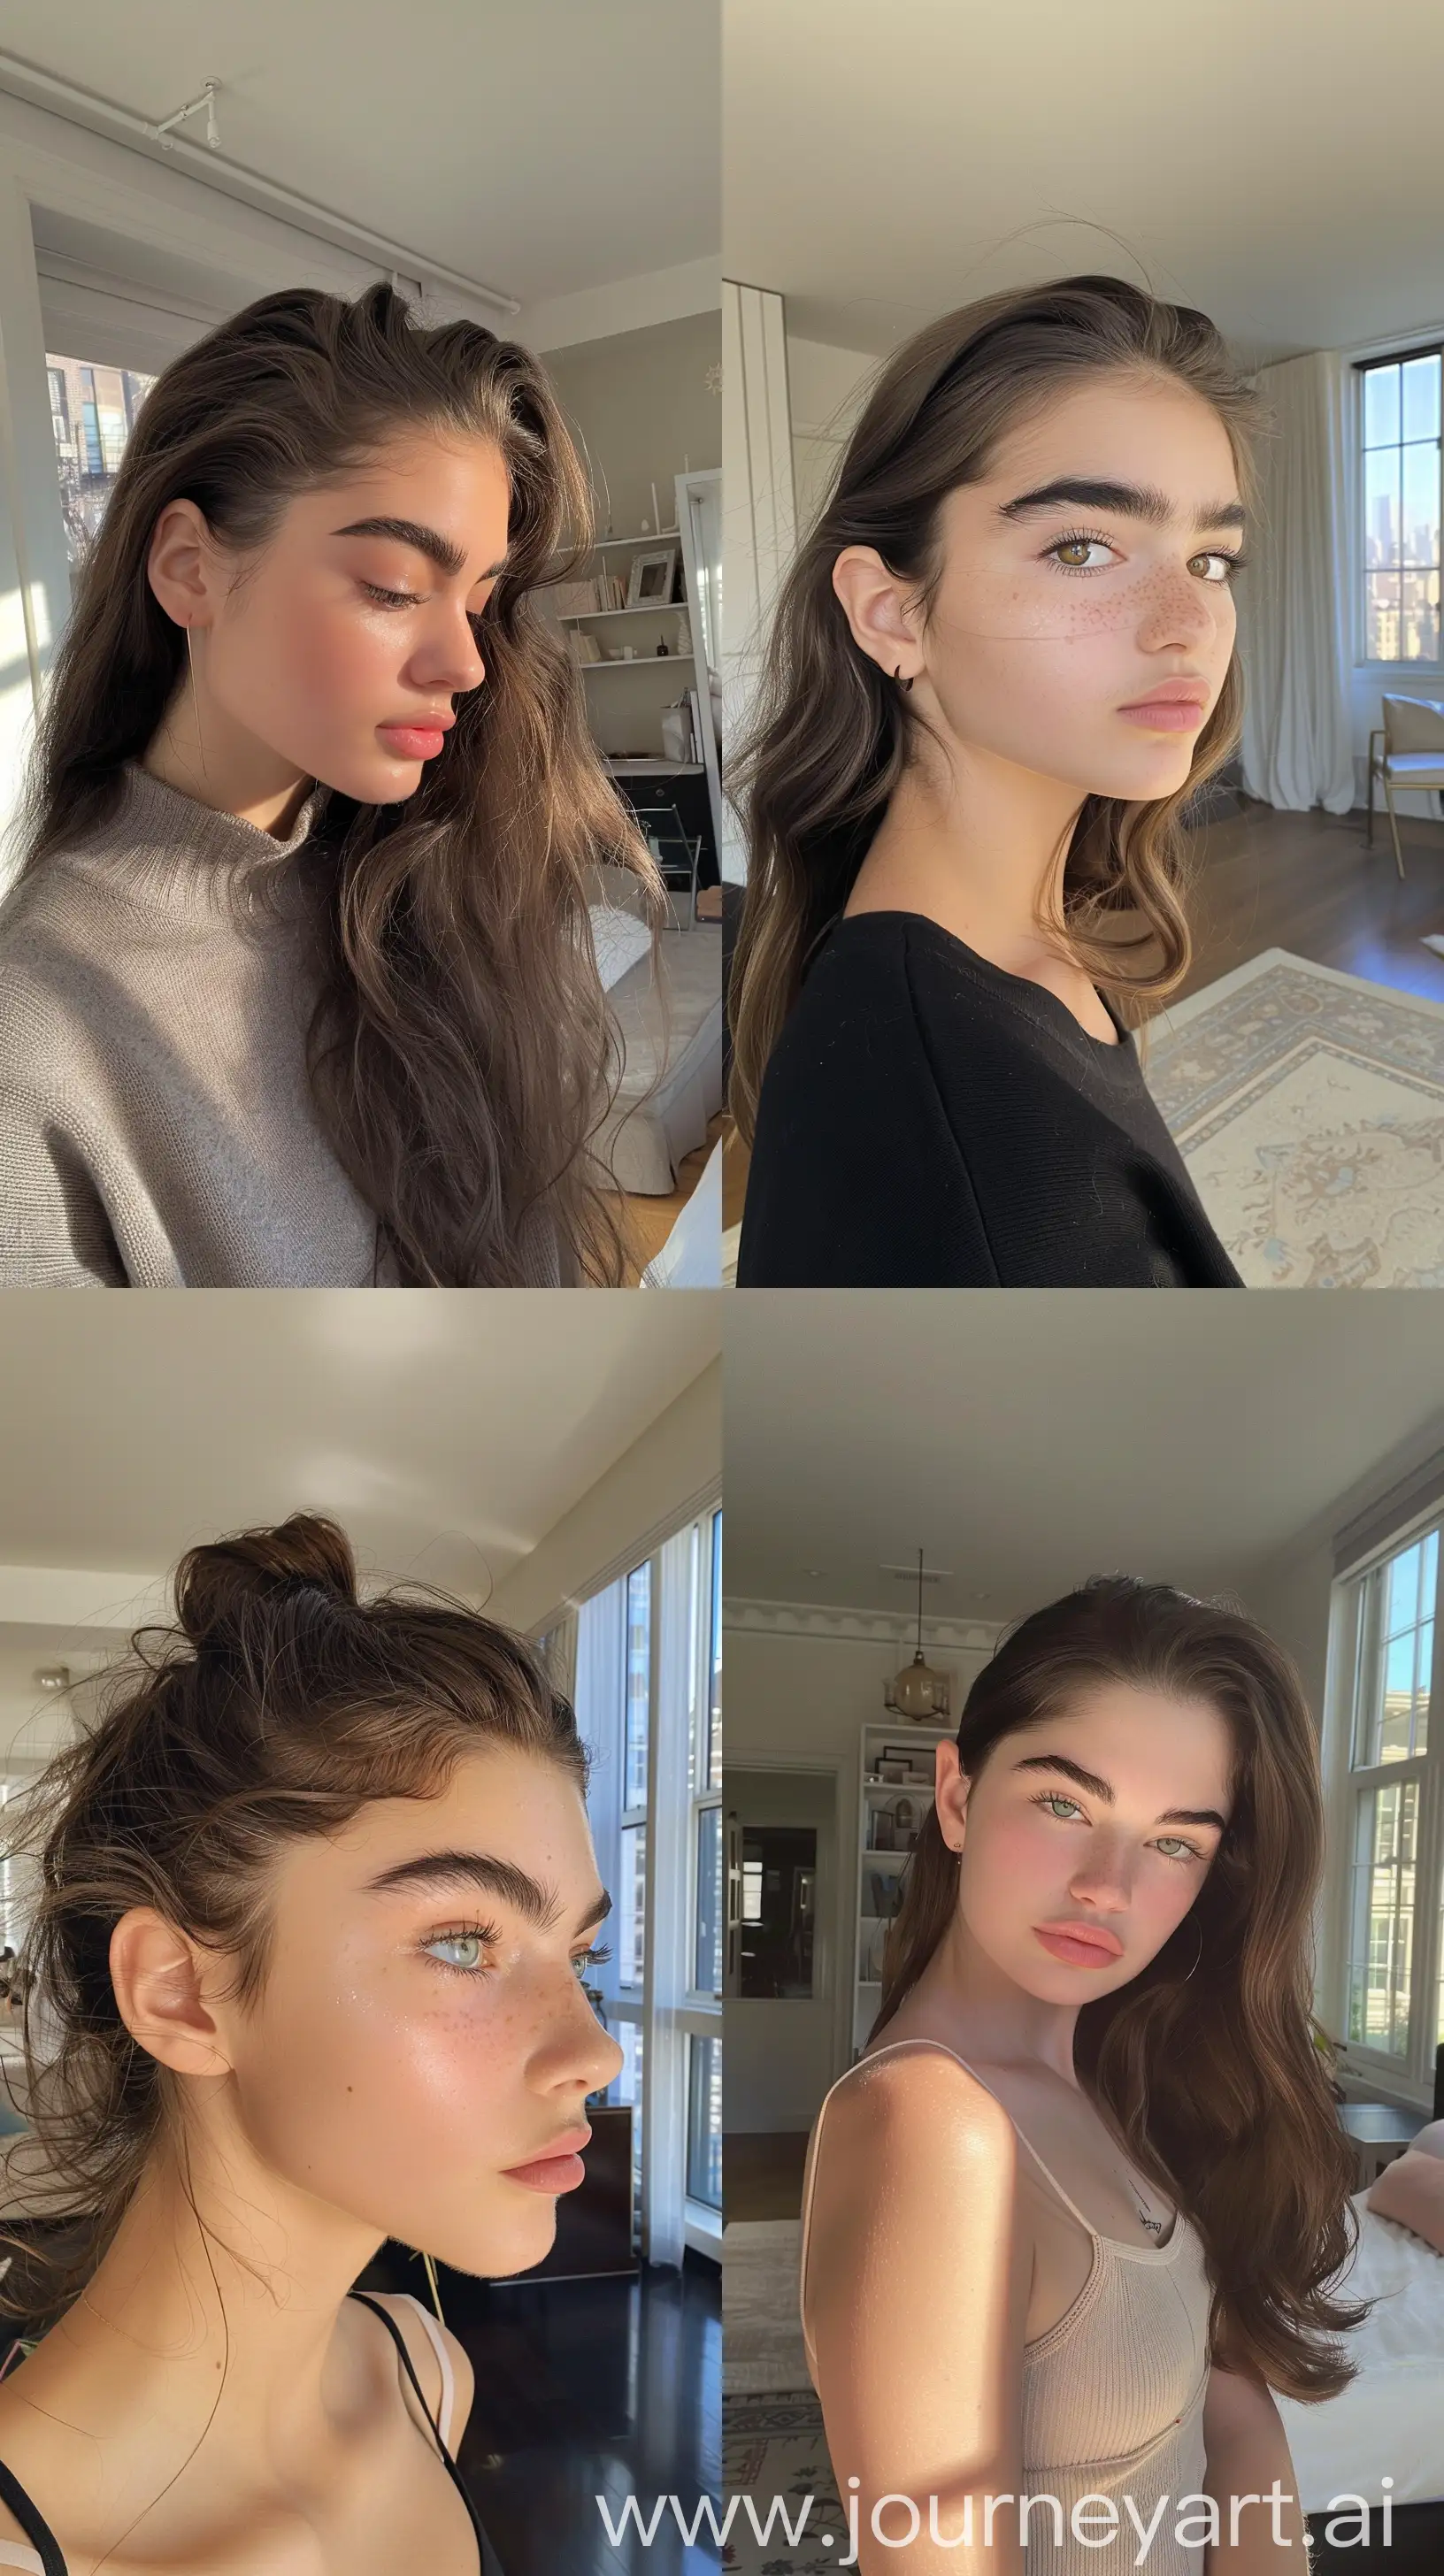 Fashionable-Instagram-Selfie-Haley-Kalils-15YearOld-Sister-in-Stylish-New-York-Apartment